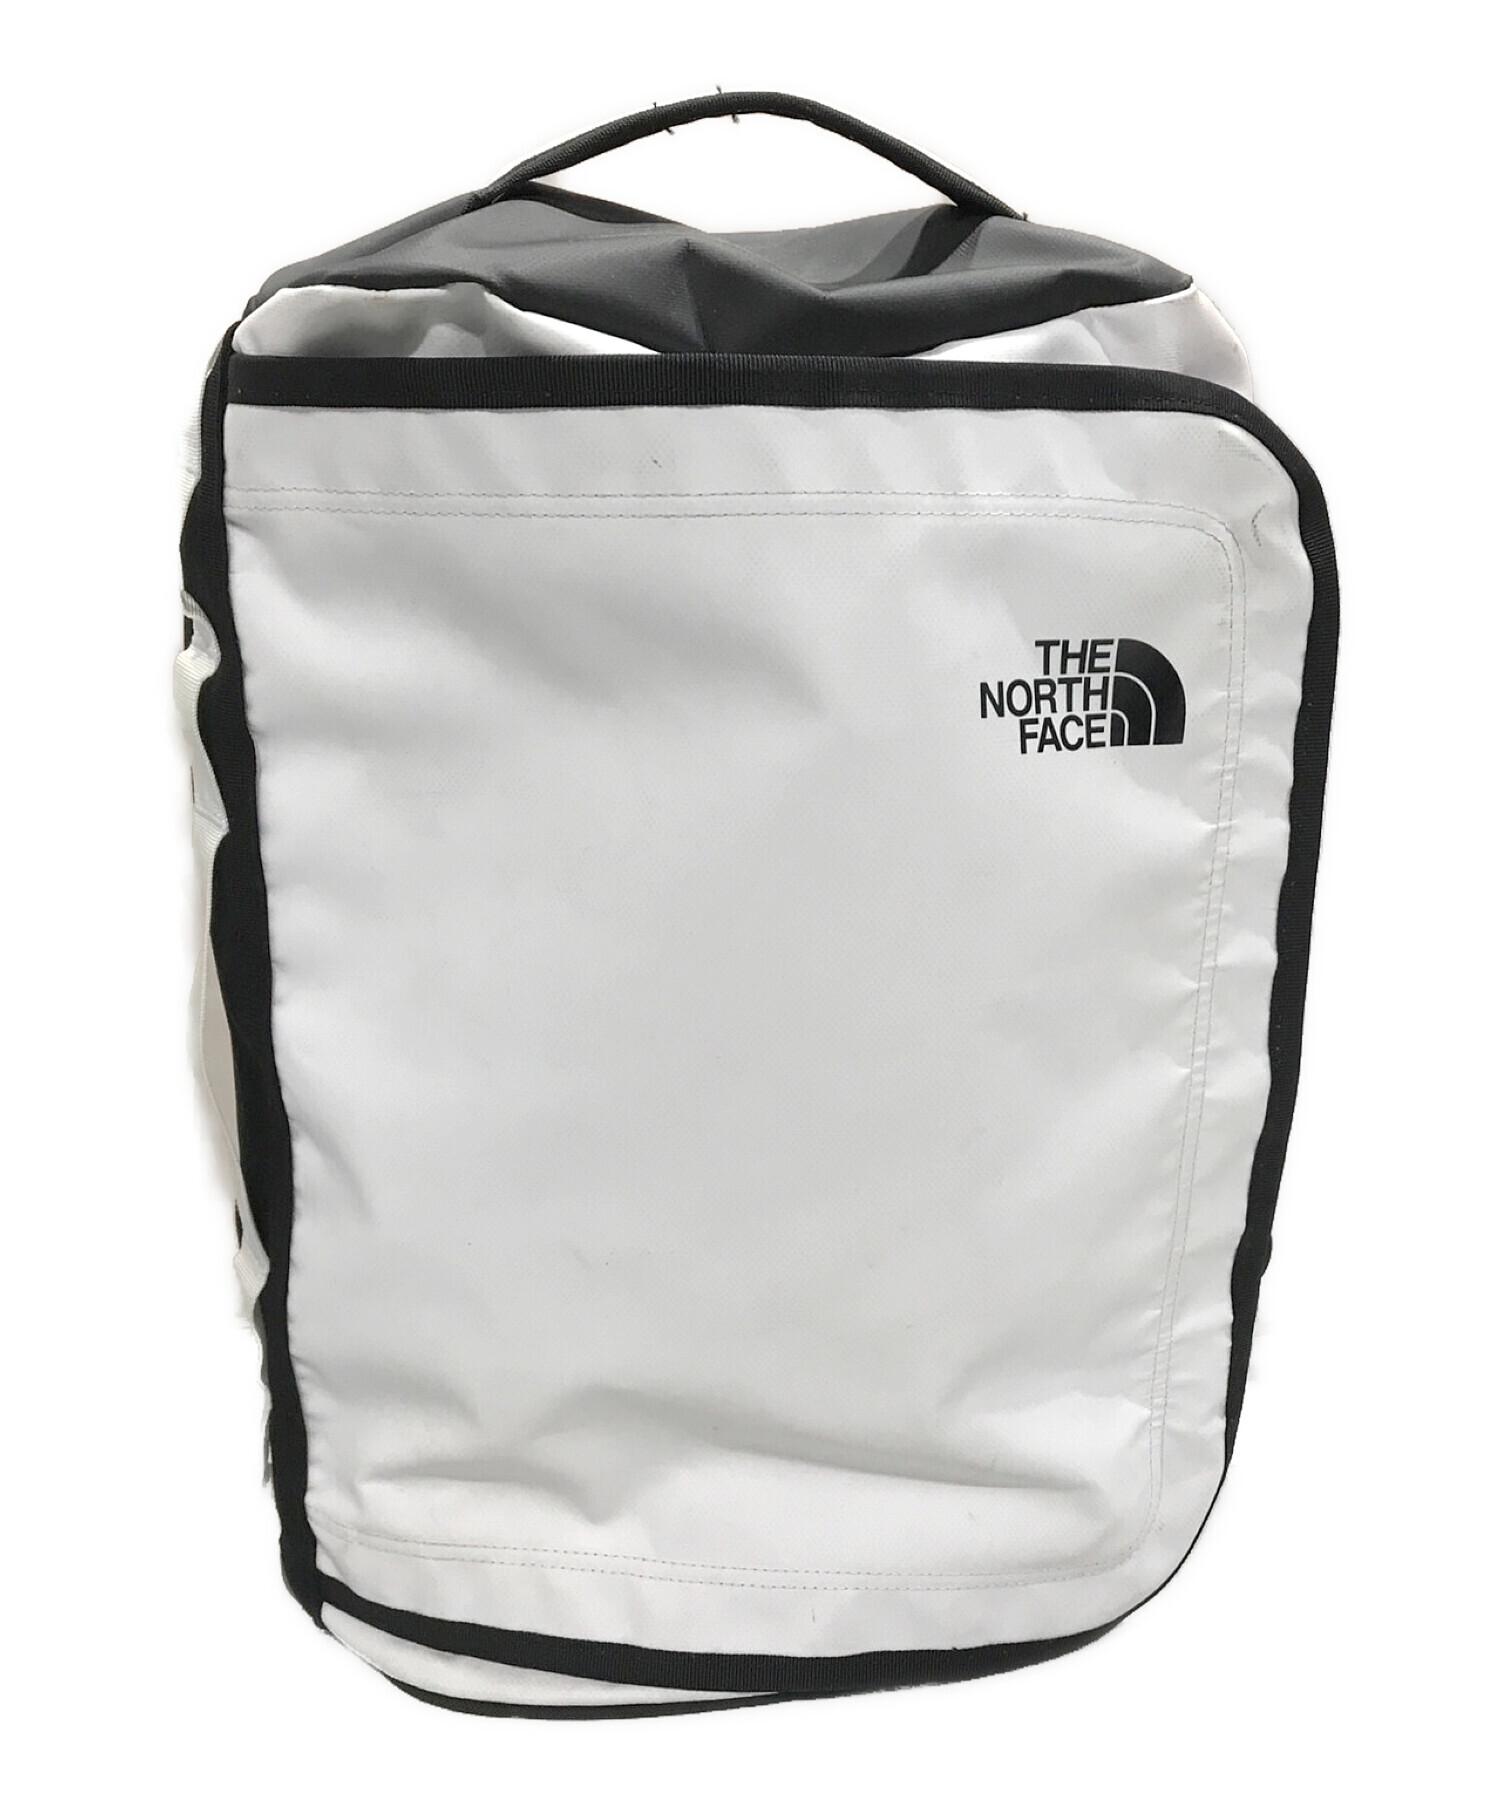 THE NORTH FACE Master Cylinder ザノースフェイス リュック NM81826